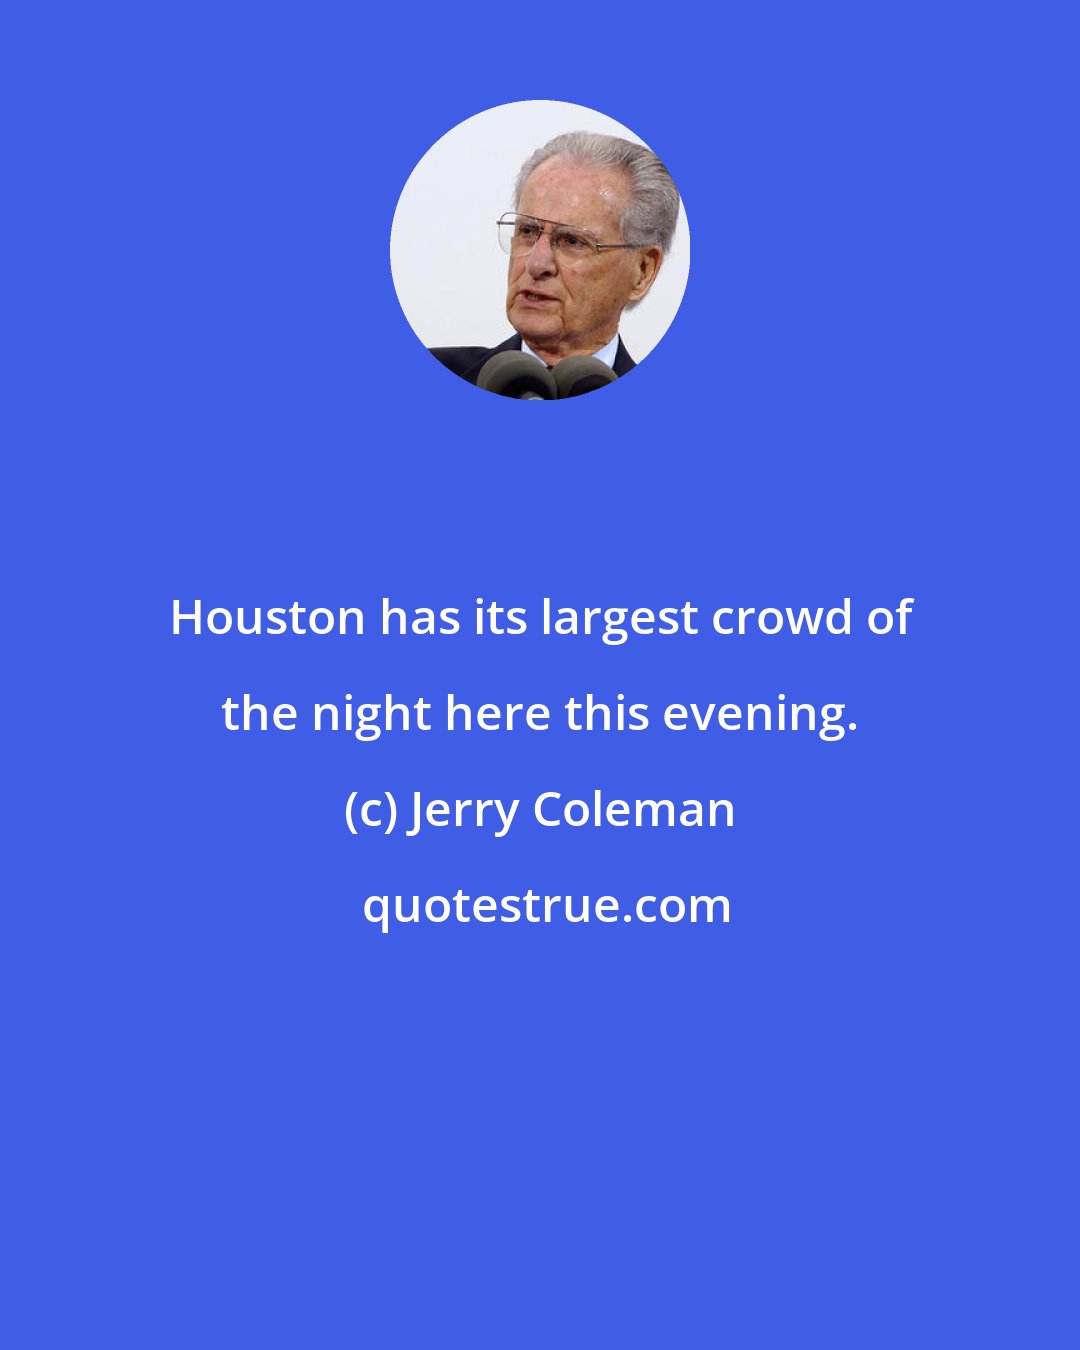 Jerry Coleman: Houston has its largest crowd of the night here this evening.